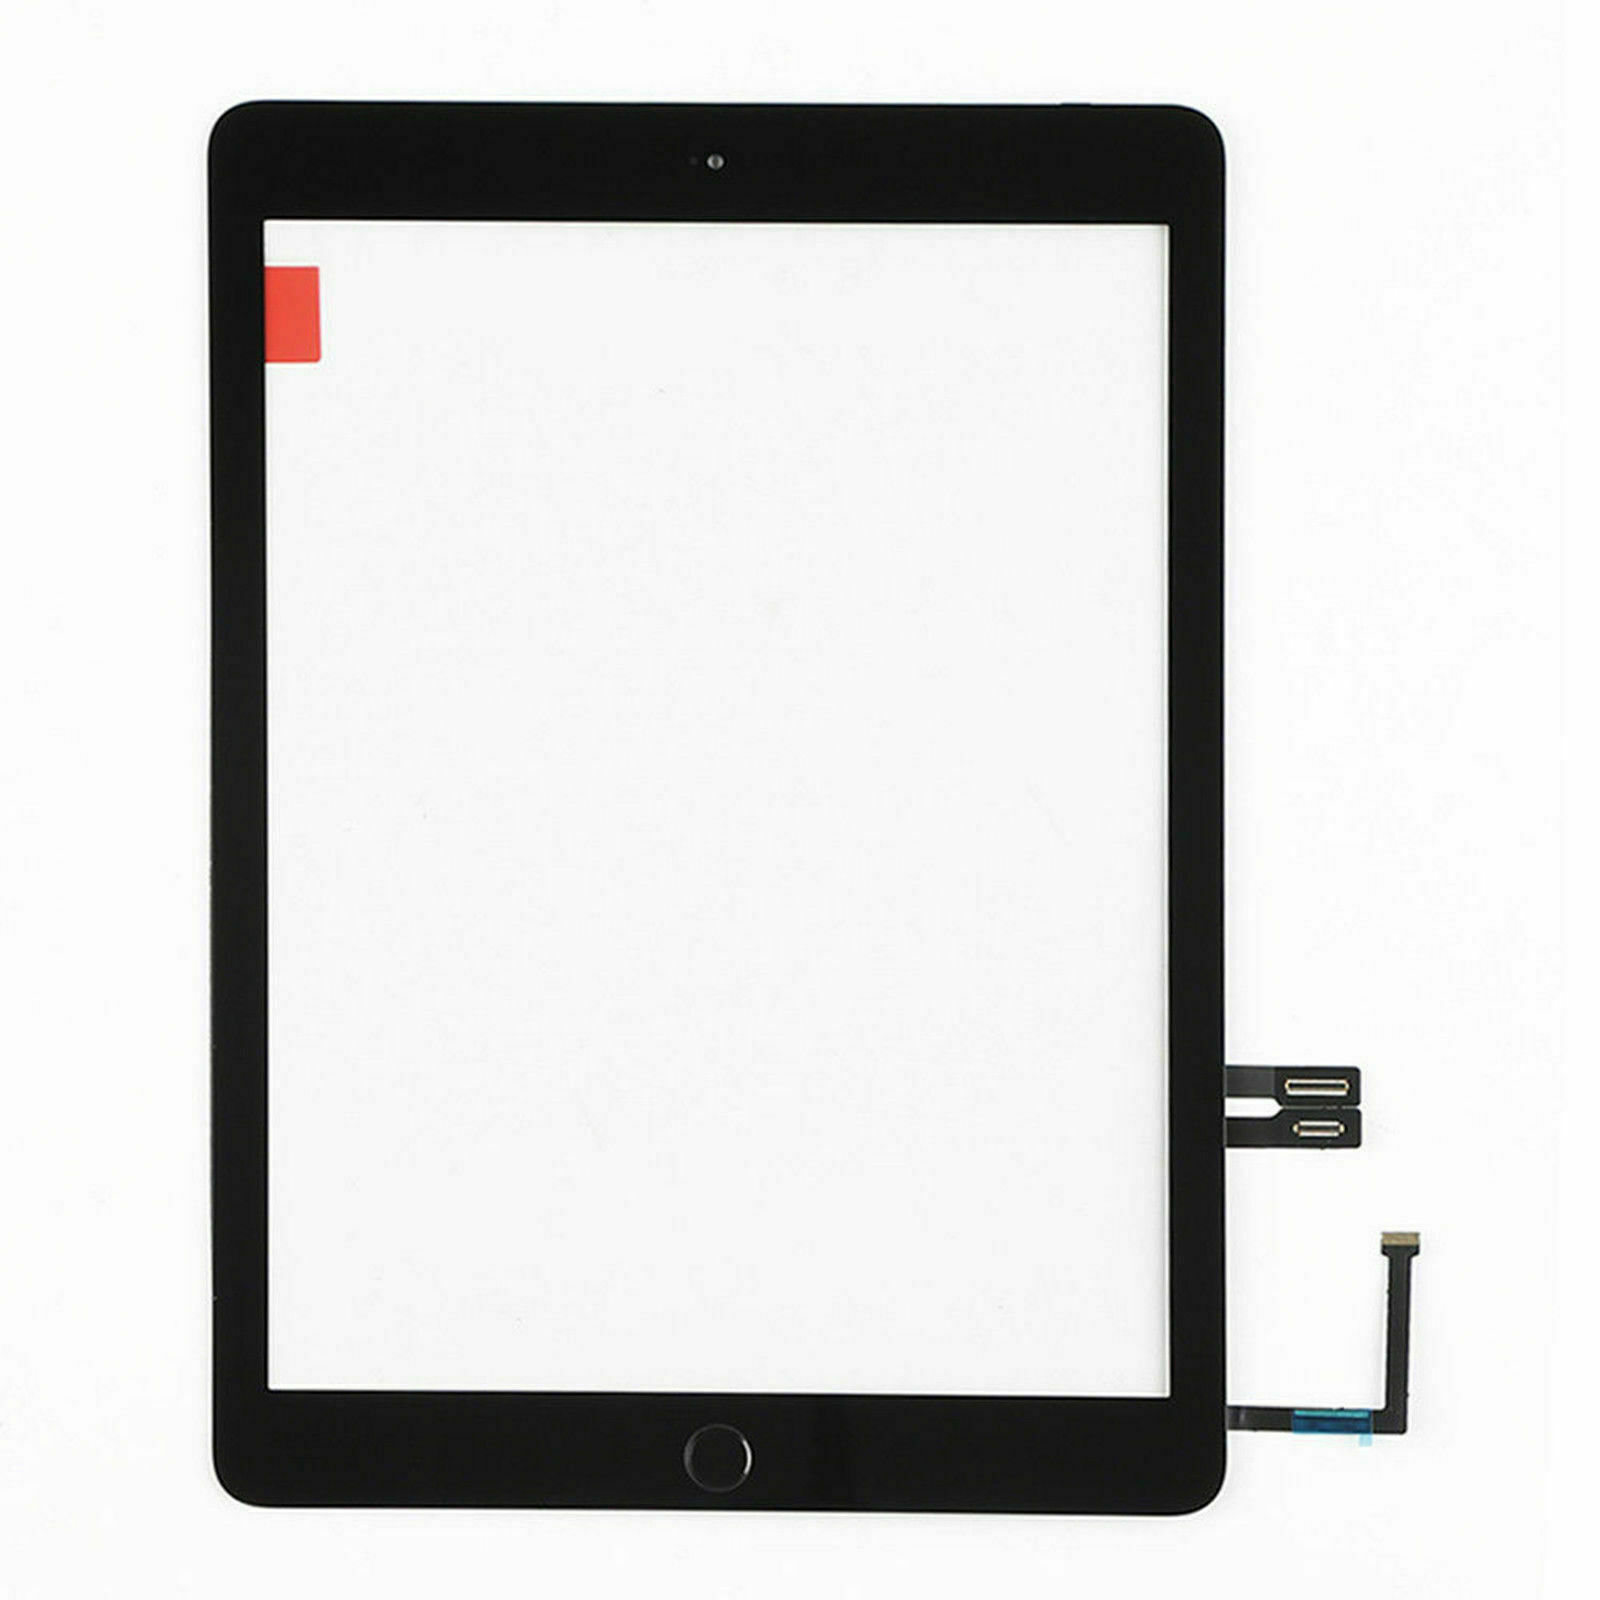 New Touch Screen Digitizer Glass Replacement For 2018 iPad 6 6th Gen A1893 A1954